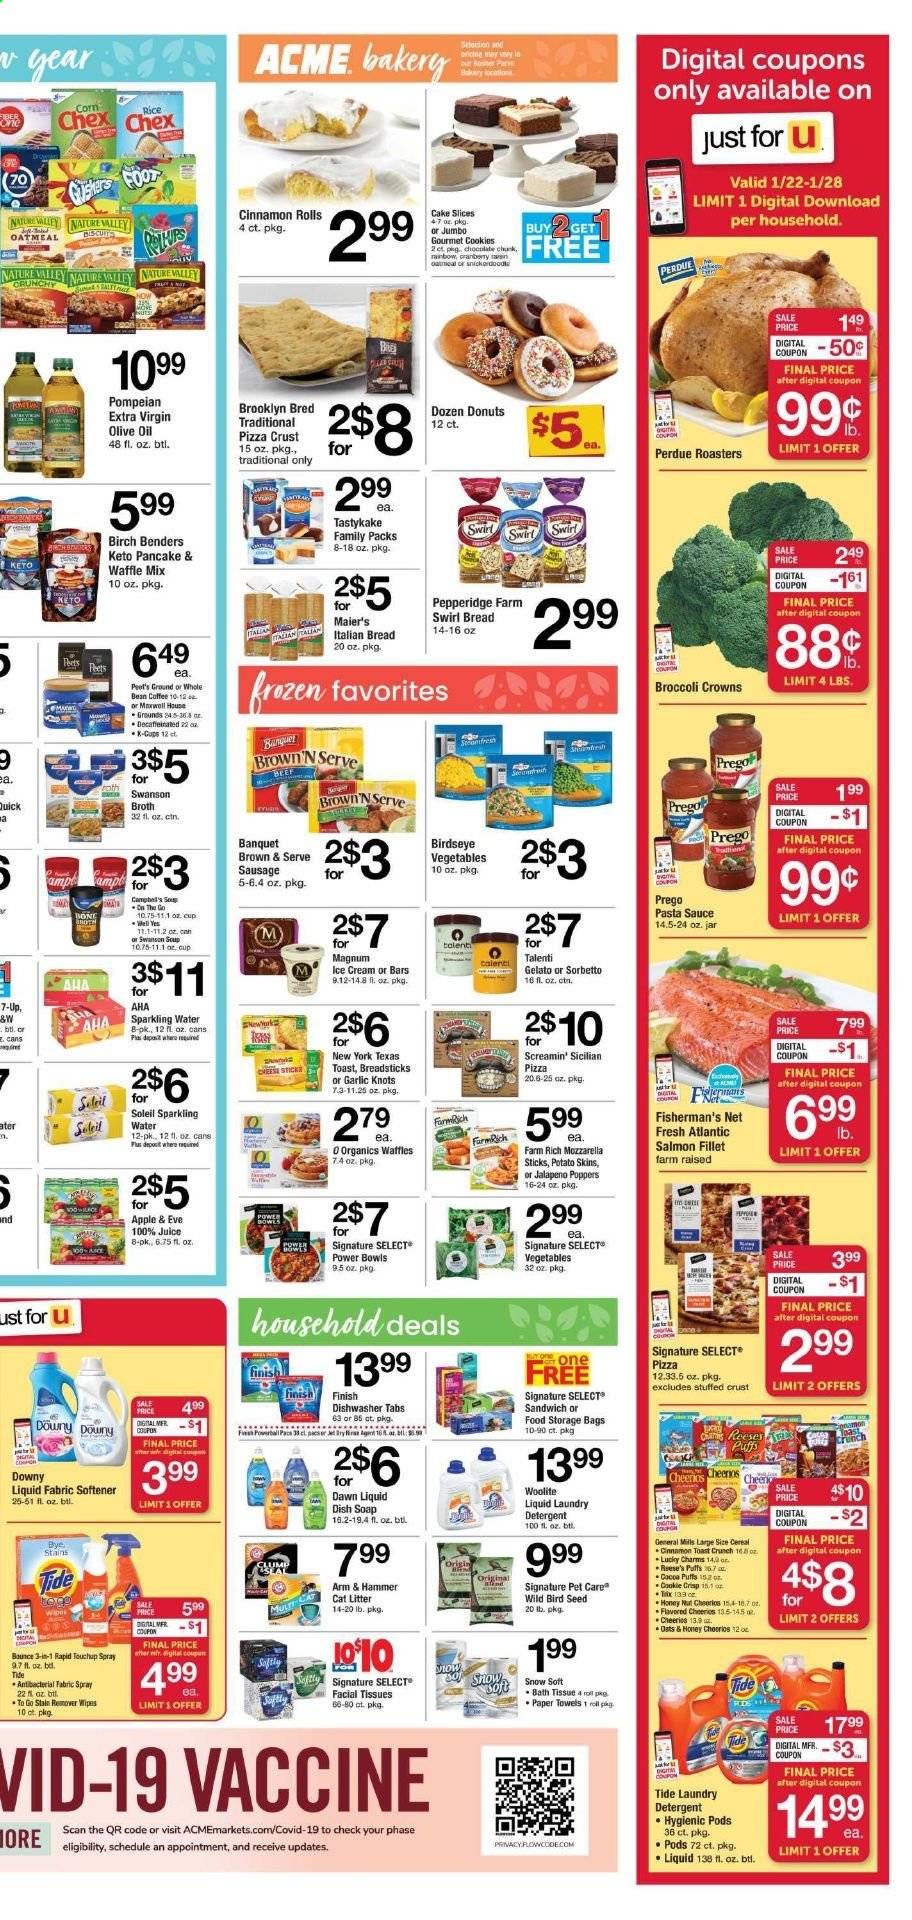 thumbnail - ACME Flyer - 01/22/2021 - 01/28/2021 - Sales products - bread, bread sticks, toast bread, cinnamon roll, puffs, cake, donut, pancakes, waffles, salmon, salmon fillet, pizza, sandwich, soup, sauce, MTR, Perdue®, sausage, mozzarella, Magnum, ice cream, Reese's, Talenti Gelato, gelato, beans, Screamin' Sicilian, cookies, biscuit, ARM & HAMMER, cocoa, oatmeal, broth, garlic, jalapeño, cereals, Cheerios, Nature Valley, rice, pasta sauce, extra virgin olive oil, olive oil, juice, 7UP, Maxwell House, coffee, coffee capsules, K-Cups, Ron Pelicano, bath tissue, detergent, wipes, stain remover, Woolite, Tide, fabric softener, laundry detergent, soap, facial tissues, storage bag, cat litter, birdhouse, bird food, bag. Page 3.